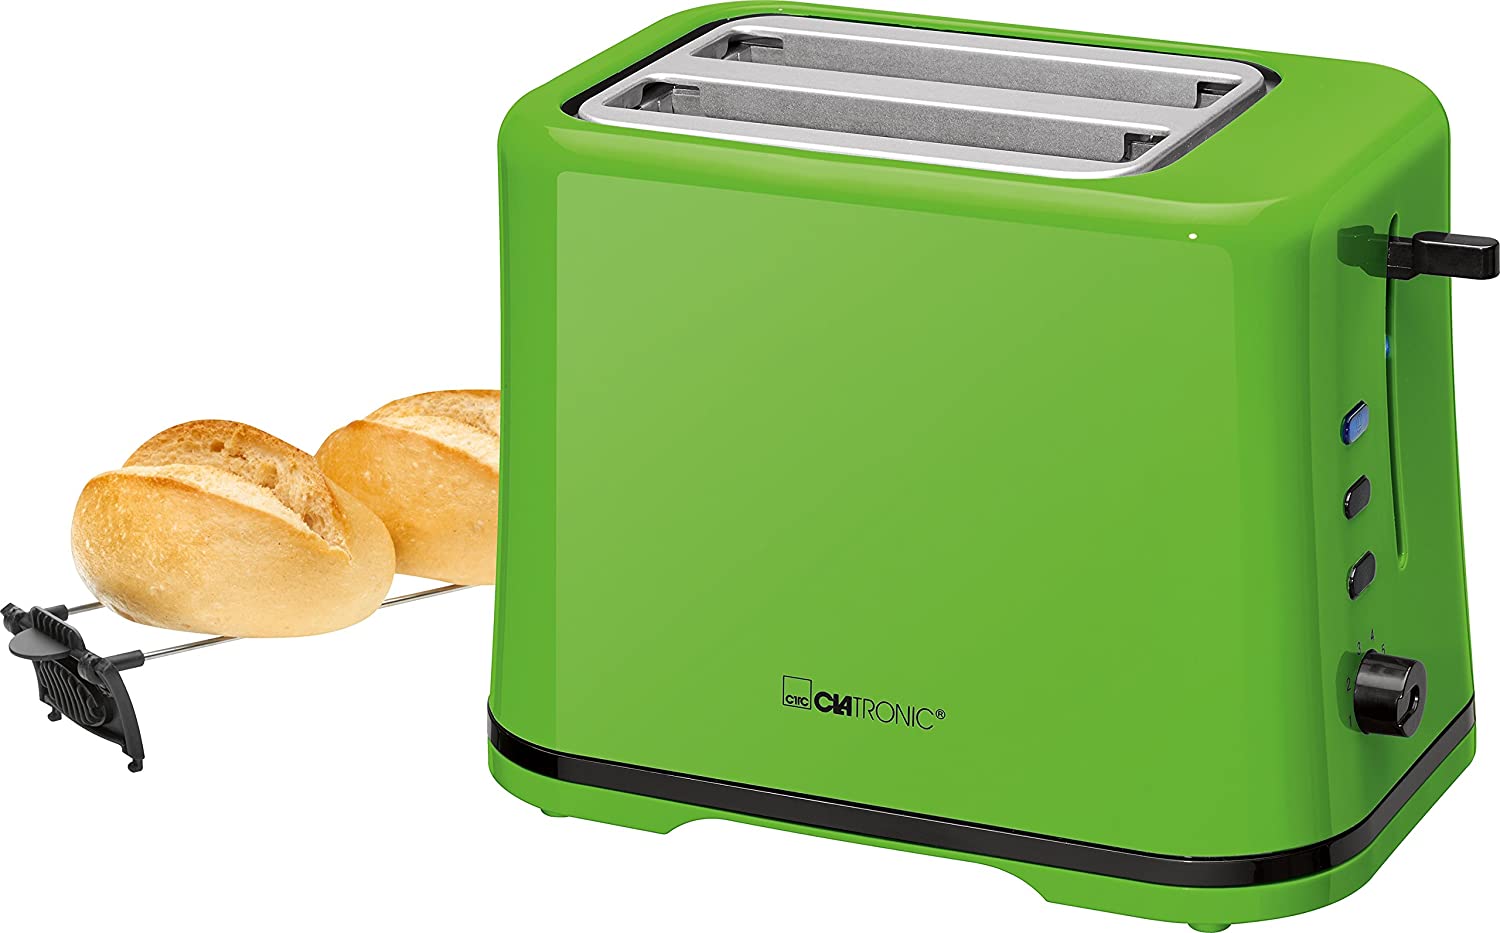 Clatronic TA 3554 compact 2-slice toaster, bread roll attachment (removable), warm-up, defrosting, quick-stop function, infinitely adjustable browning level, crumb drawer, green